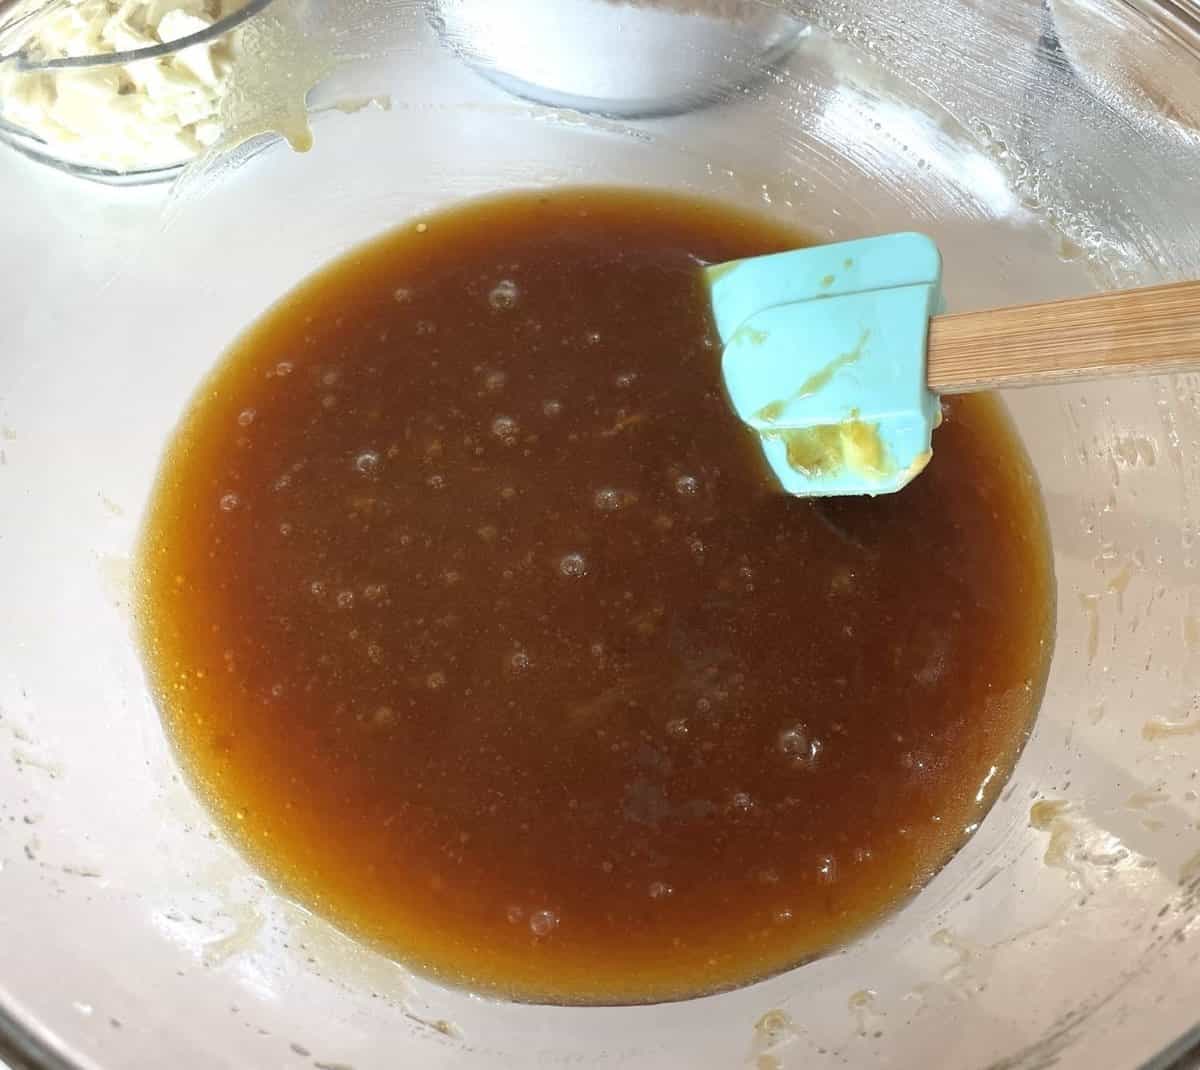 Mixing melted butter with brown and white sugars in a glass bowl